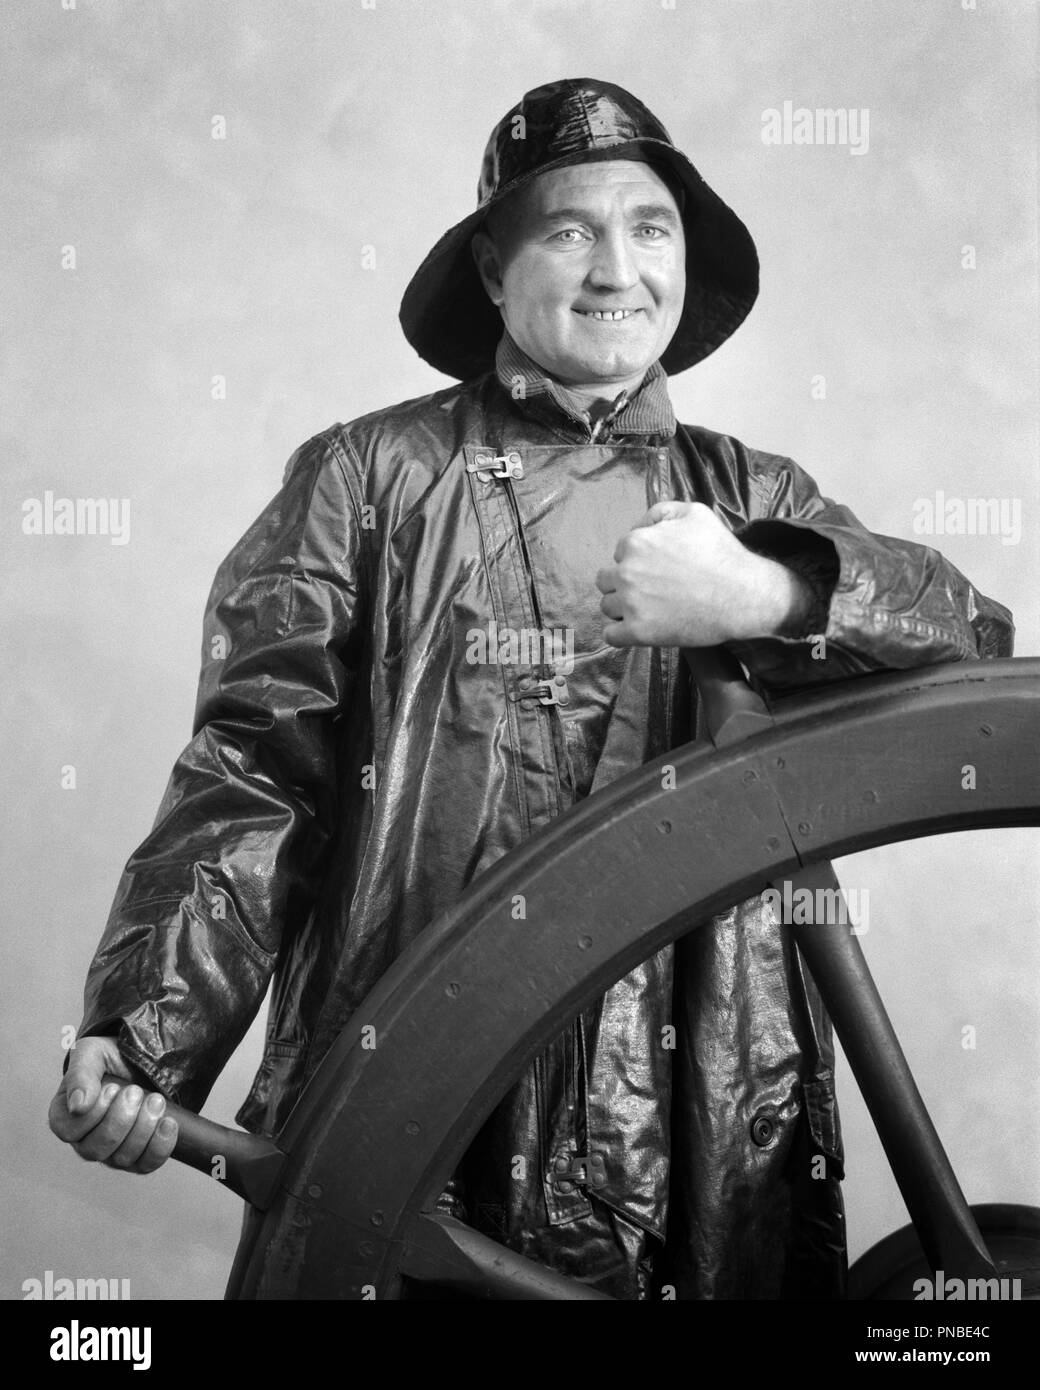 1930s SMILING MAN SAILOR WEARING OILSKIN SOU’WESTER HAT AND RAIN COAT LOOKING AT CAMERA STANDING WATCH AT SHIP’S WHEEL - a2269 HAR001 HARS SAILOR JOBS HEALTHINESS HALF-LENGTH PERSONS DANGER MALES RISK CONFIDENCE EXPRESSIONS MIDDLE-AGED B&W MIDDLE-AGED MAN EYE CONTACT SKILL OCCUPATION HAPPINESS SKILLS CHEERFUL ADVENTURE HELM STRENGTH COURAGE AND EXPERIENCED EXCITEMENT KNOWLEDGE PROGRESS PRIDE AT GRIPPING OCCUPATIONS SMILES SPOKES JOYFUL SHIP'S OLD SALT ABLE CONFIDENT MID-ADULT MID-ADULT MAN OILSKIN BLACK AND WHITE CAUCASIAN ETHNICITY HAR001 OLD FASHIONED SEAMAN Stock Photo